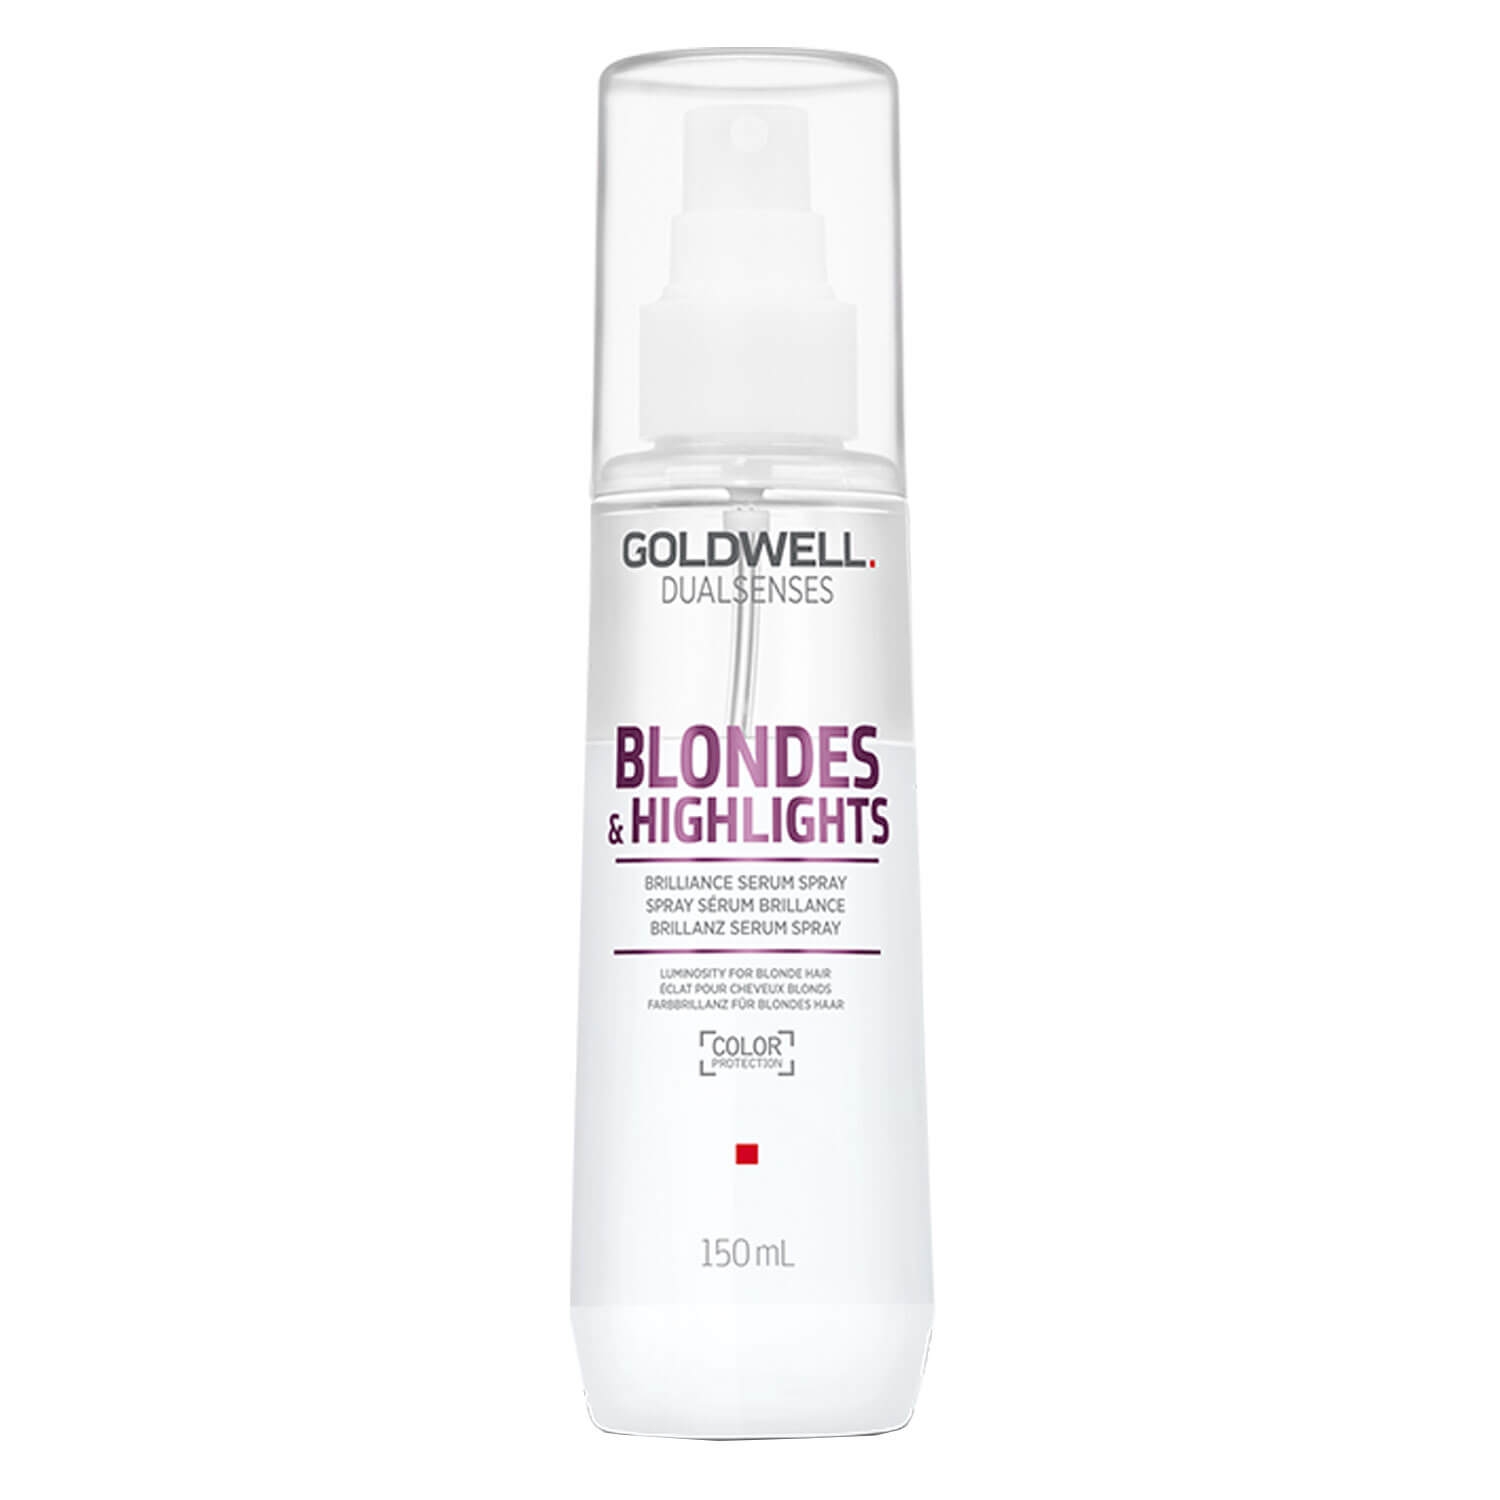 Product image from Dualsenses Blondes & Highlights - Brilliance Serum Spray